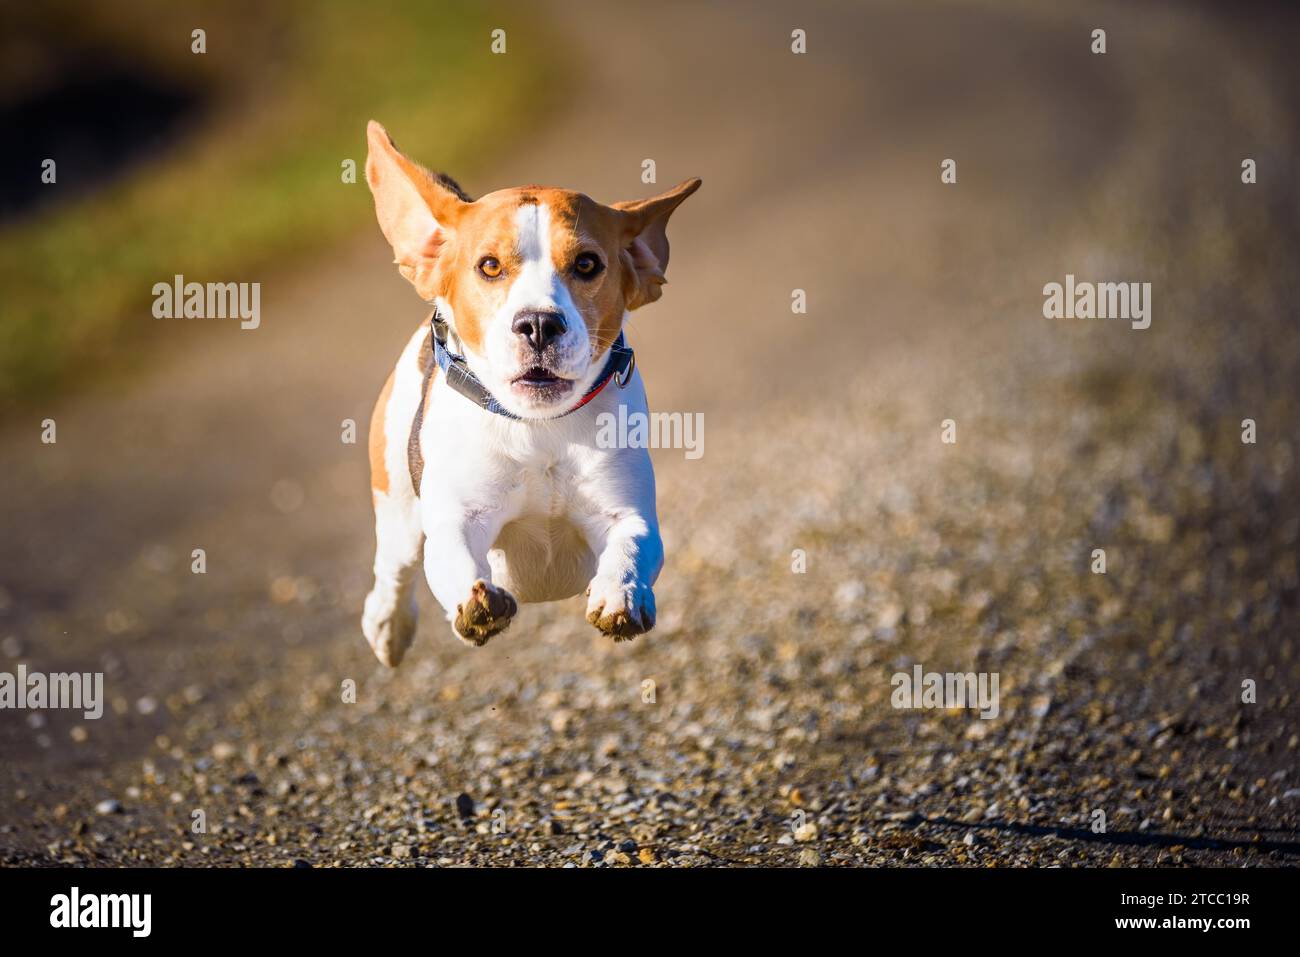 Dog Beagle running fast and jumping with tongue out on the rural path. Pet background Stock Photo